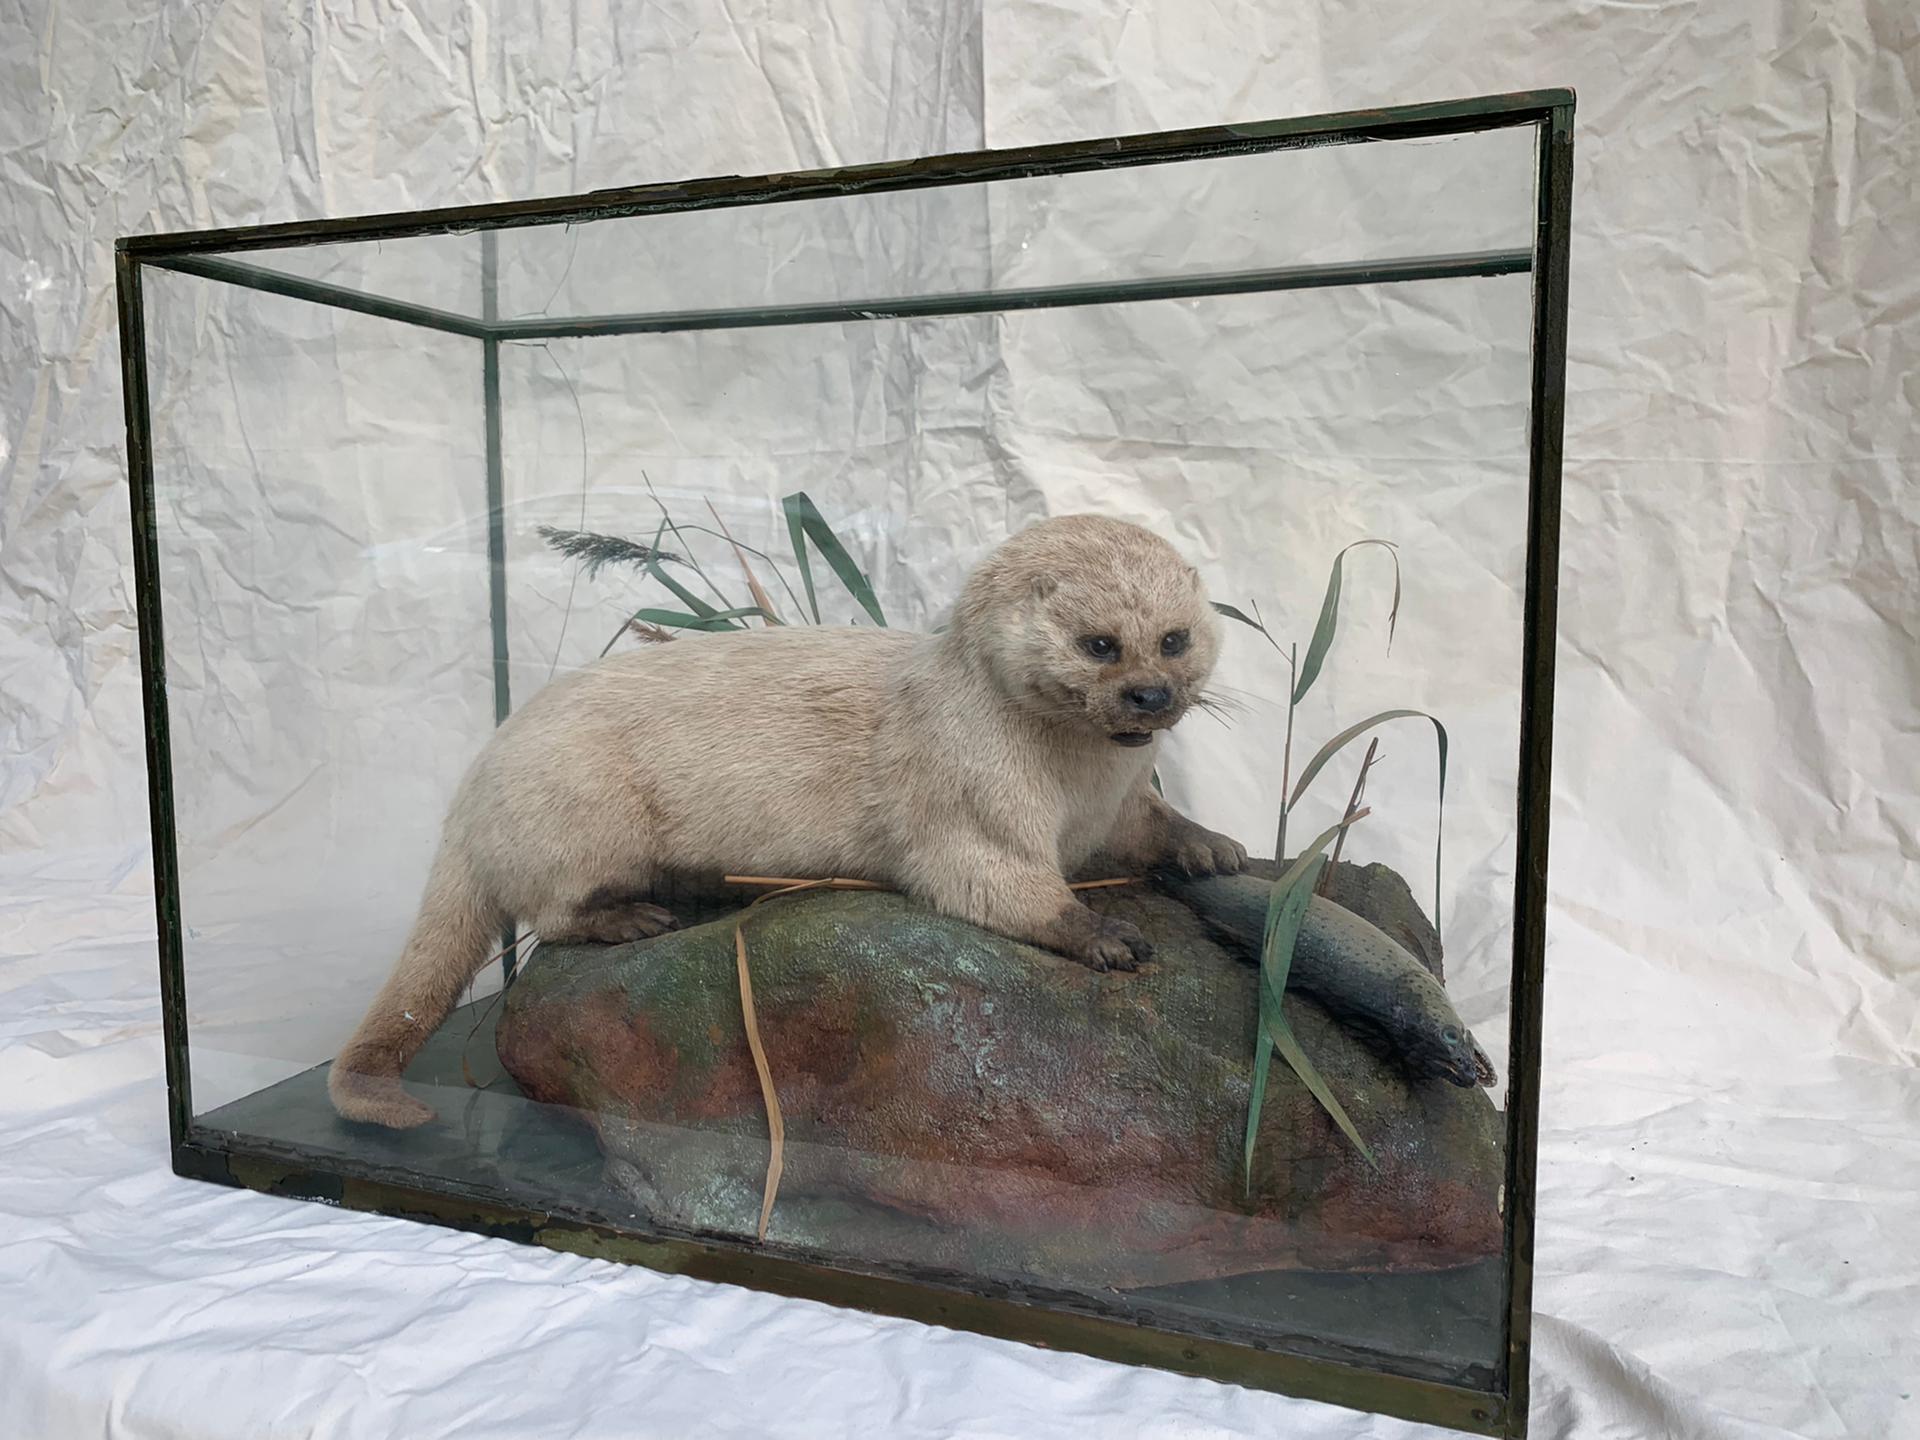 Otter and loss - Taxidermy in a glass machine - London Piccadilly, Rowland Ward Ld. 19th Century.

Taxidermy is the art and process of preserving, mounting, and displaying animal specimens for various purposes, such as scientific study, educational